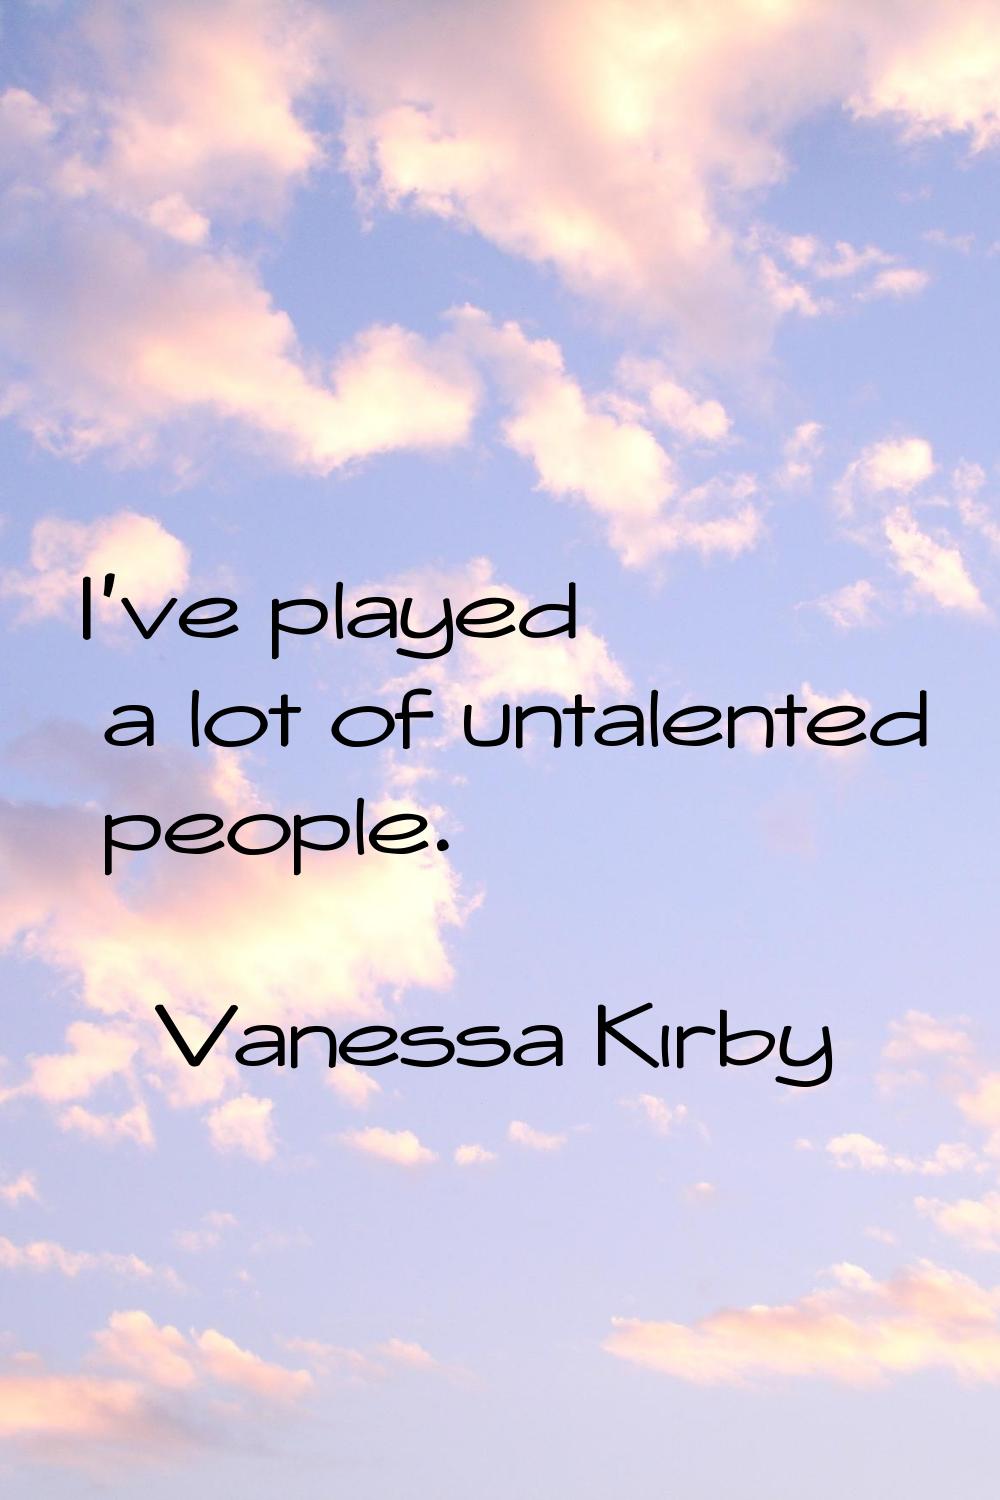 I've played a lot of untalented people.